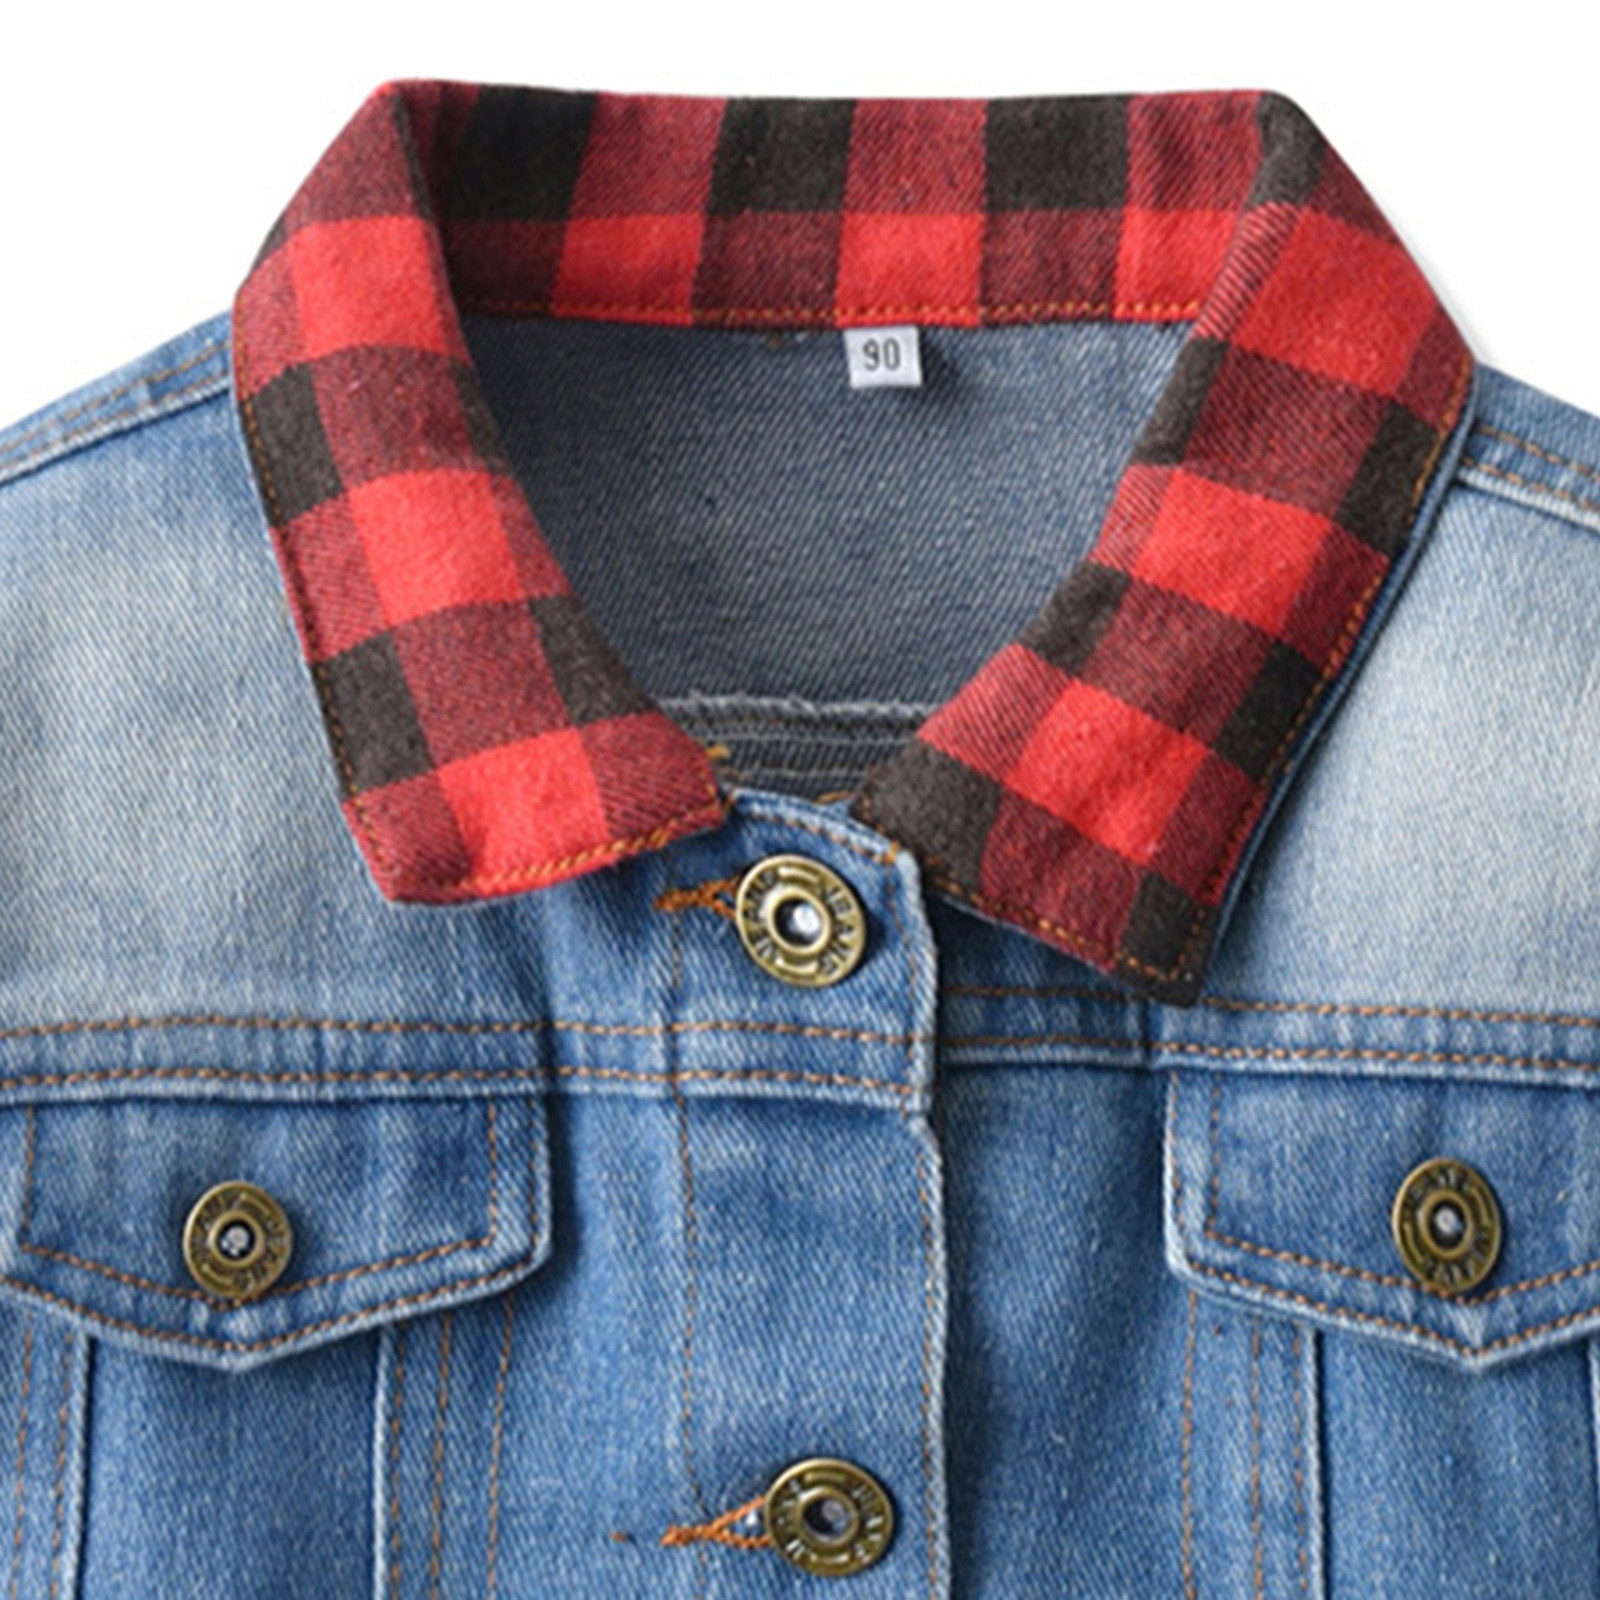 Tall Lightweight Jacket Toddler Children Outwear Red Plaid Over Winter Long Sleeve Denim Jacket Blouse Boys Coats for Baby Boy - image 4 of 6